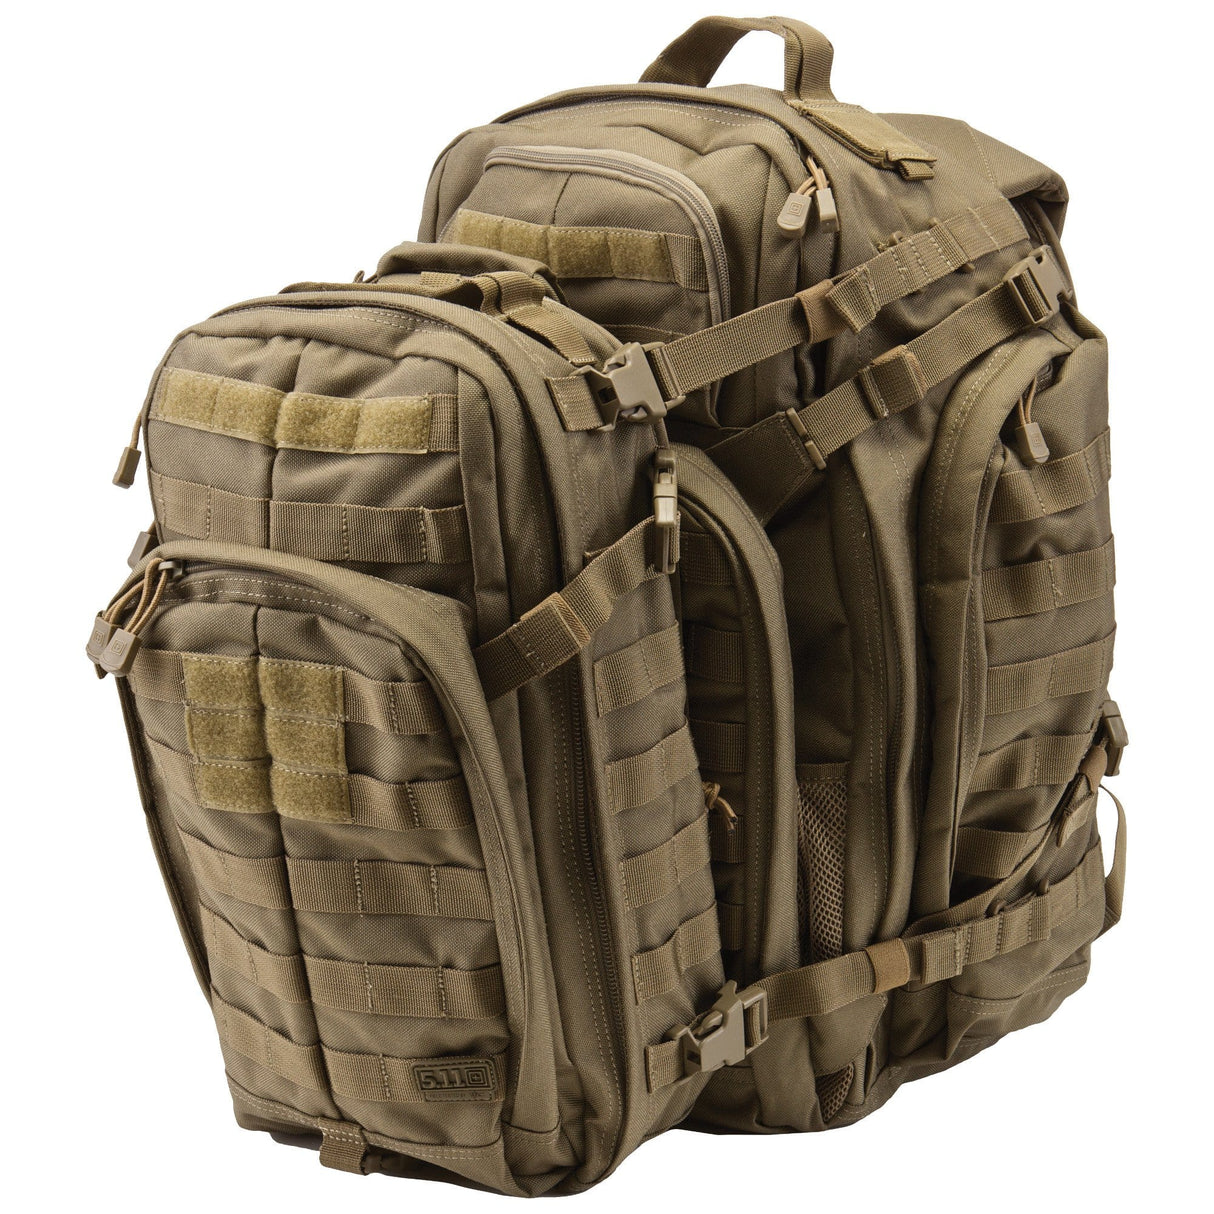 RUSH TIER SYSTEM - 5.11 Tactical Finland Store